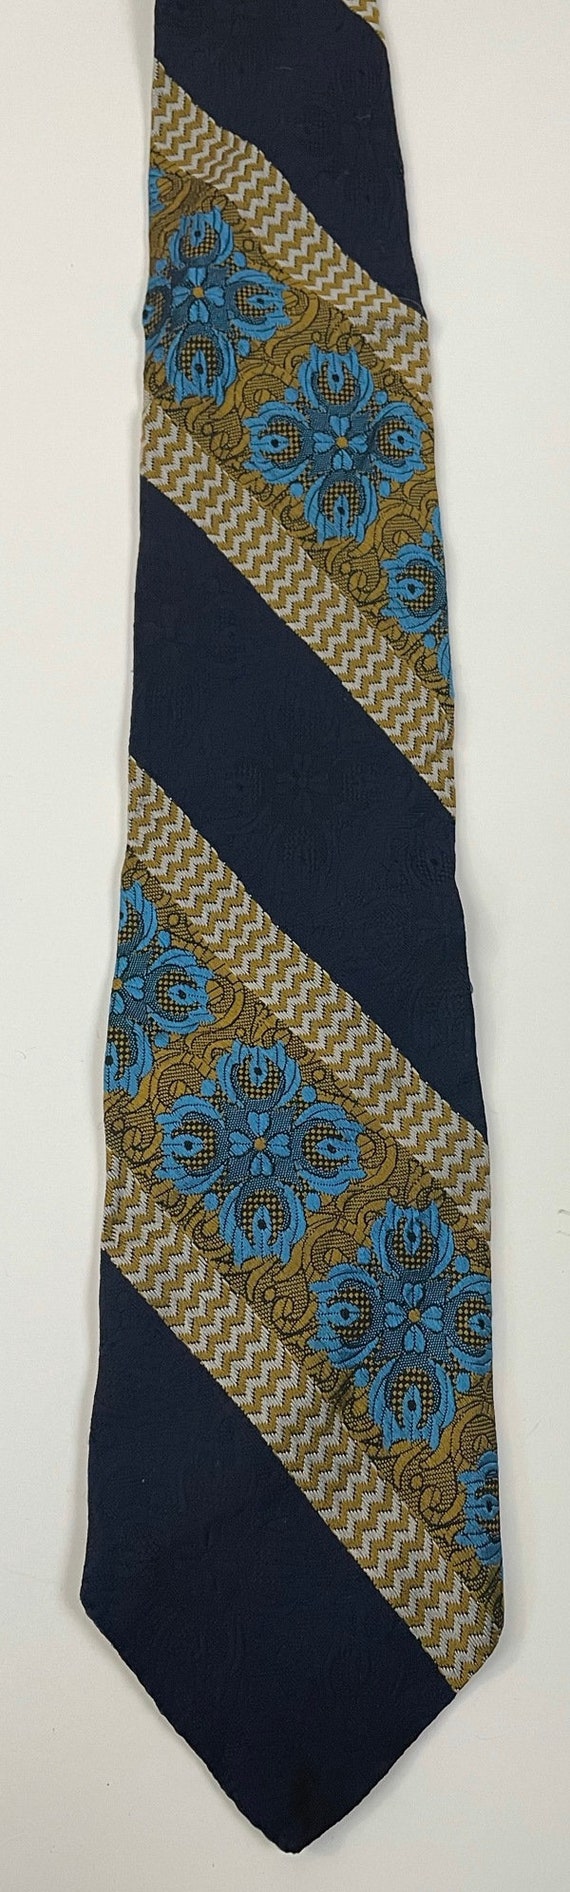 80s Black Gold & Bright Blue Abstract Striped Tie… - image 2